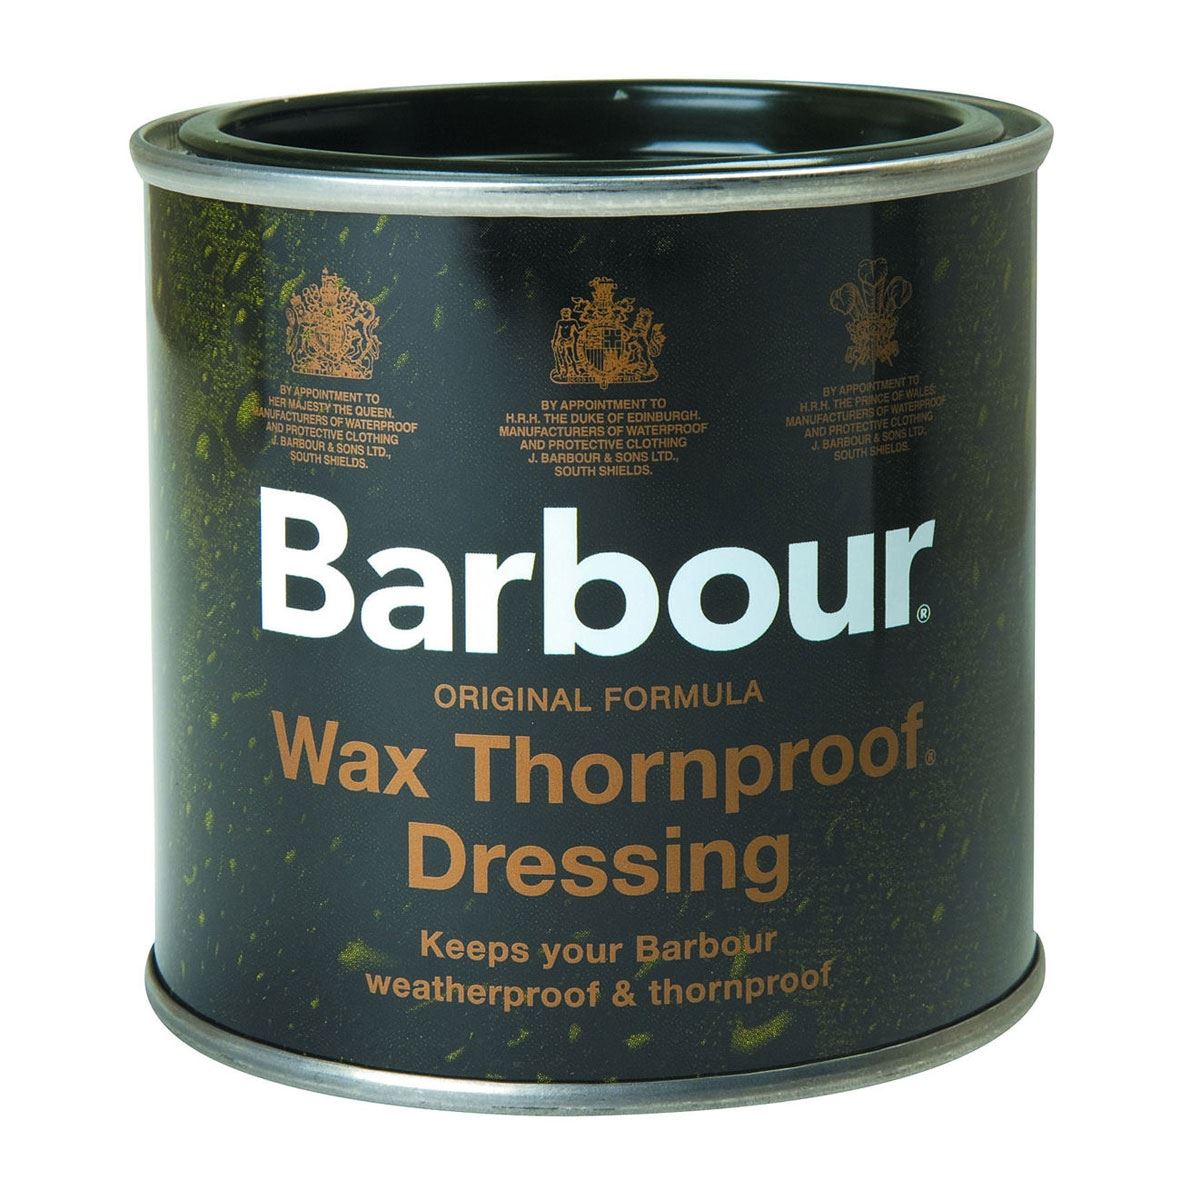 How many coats will this tin of Barbour Wax cover?